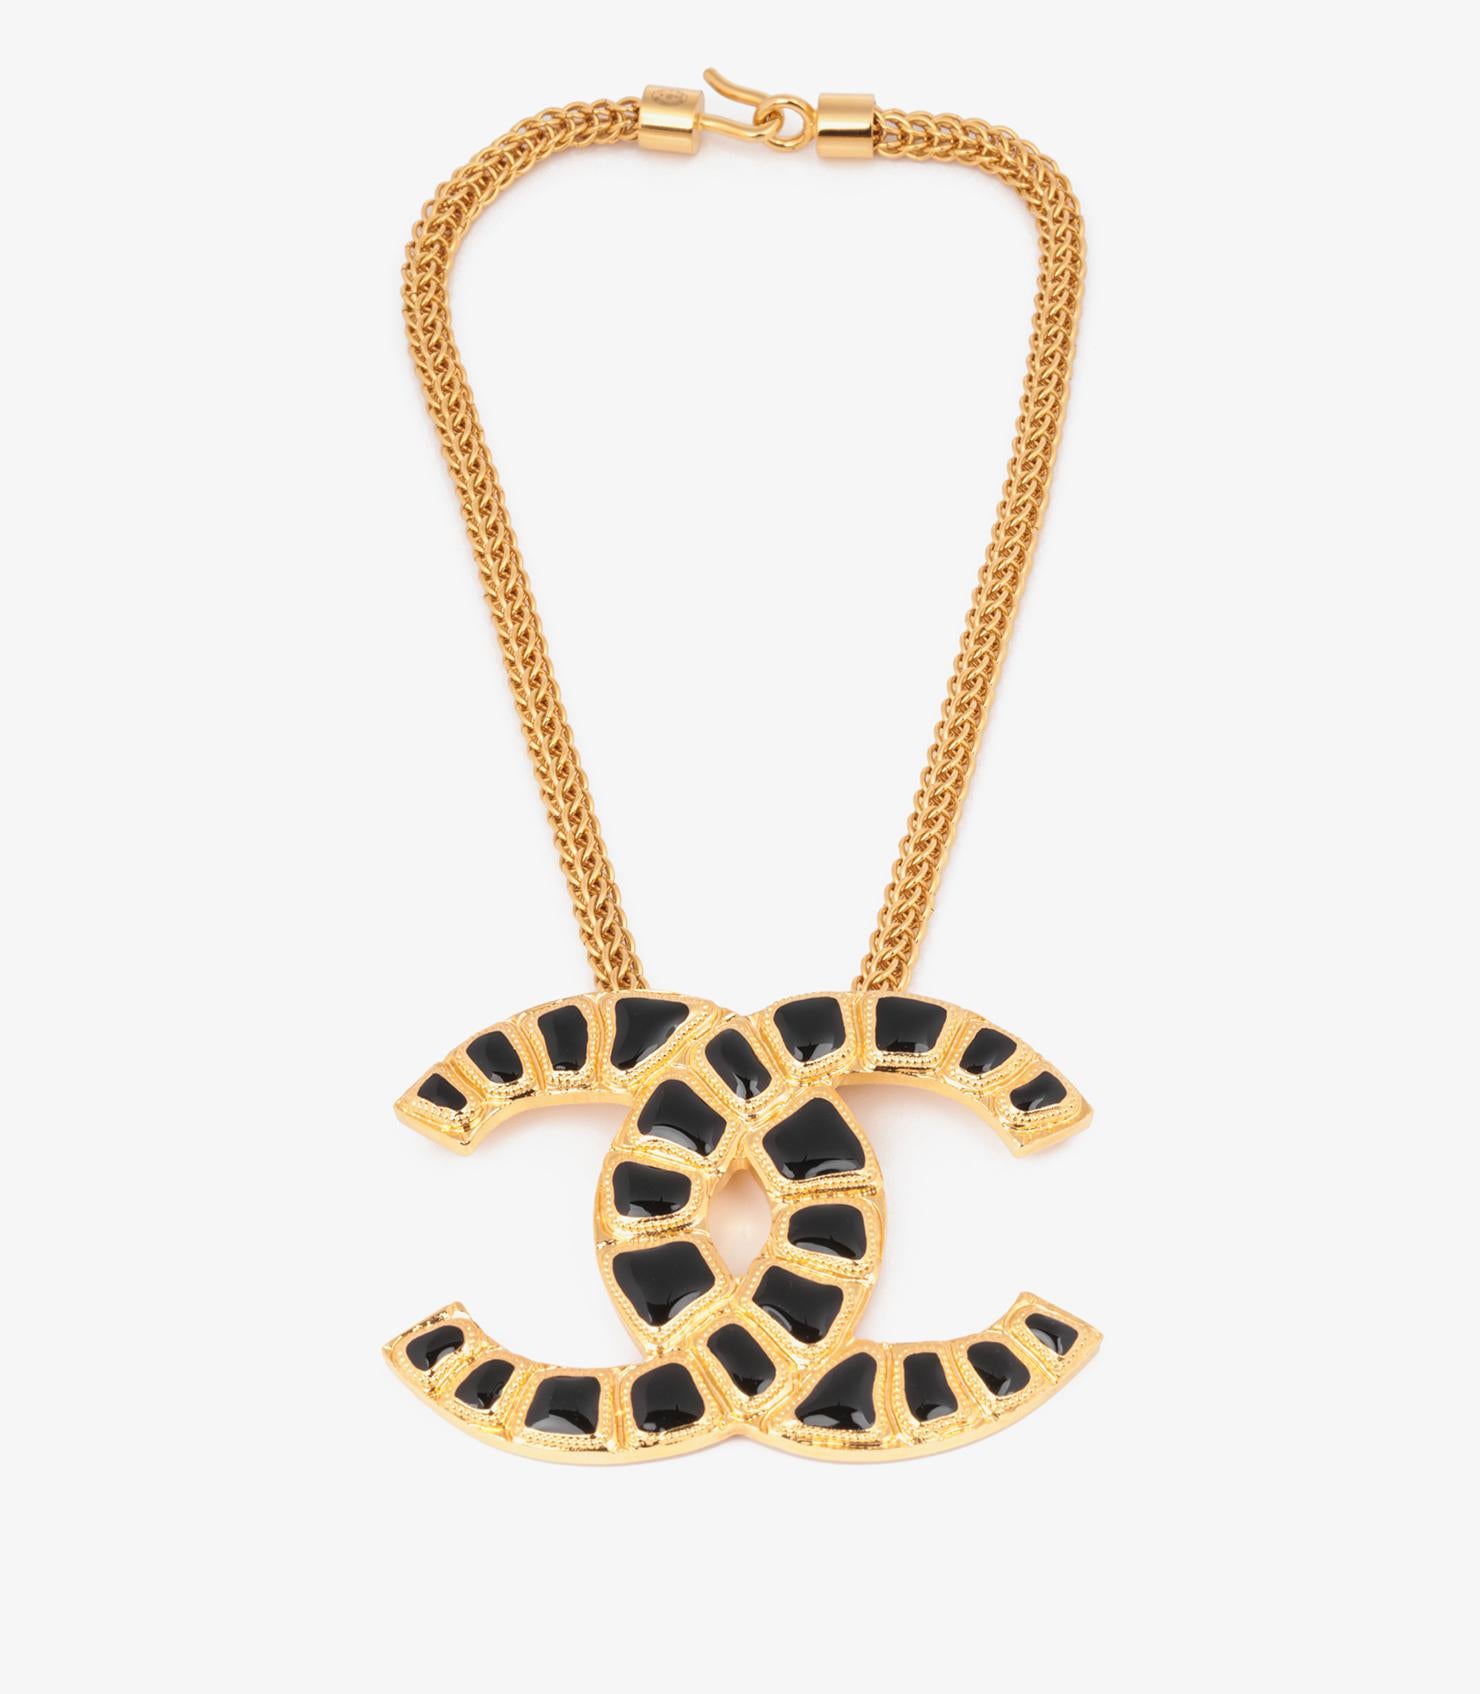 Chanel Black Resin Gold Tone Egyptian CC Necklace In Excellent Condition For Sale In Bishop's Stortford, Hertfordshire